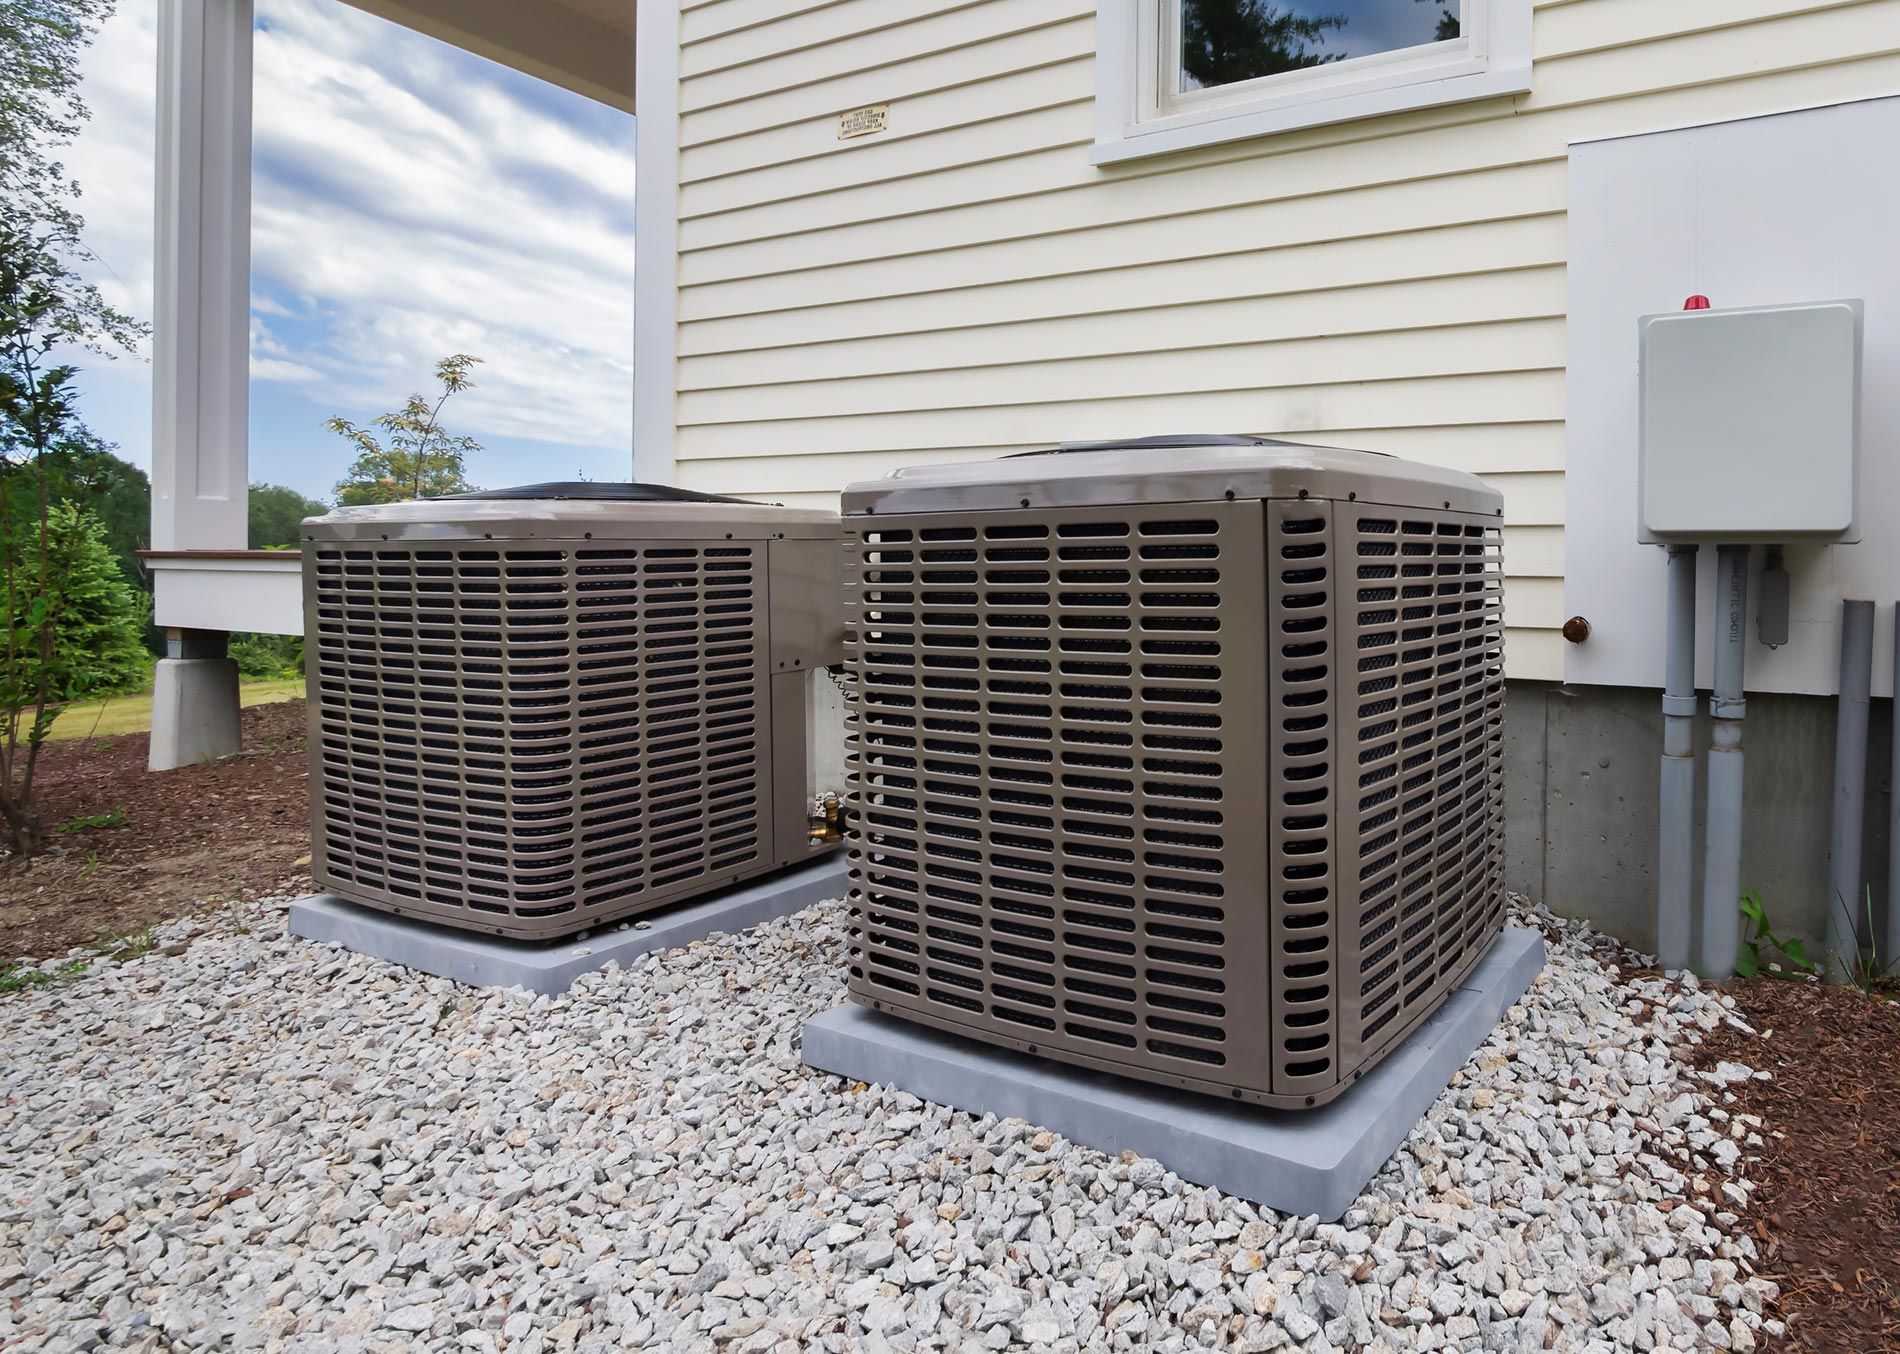 Beechtree Energy is an HVAC Company located in West Barnstable, MA and services Cape Cod.